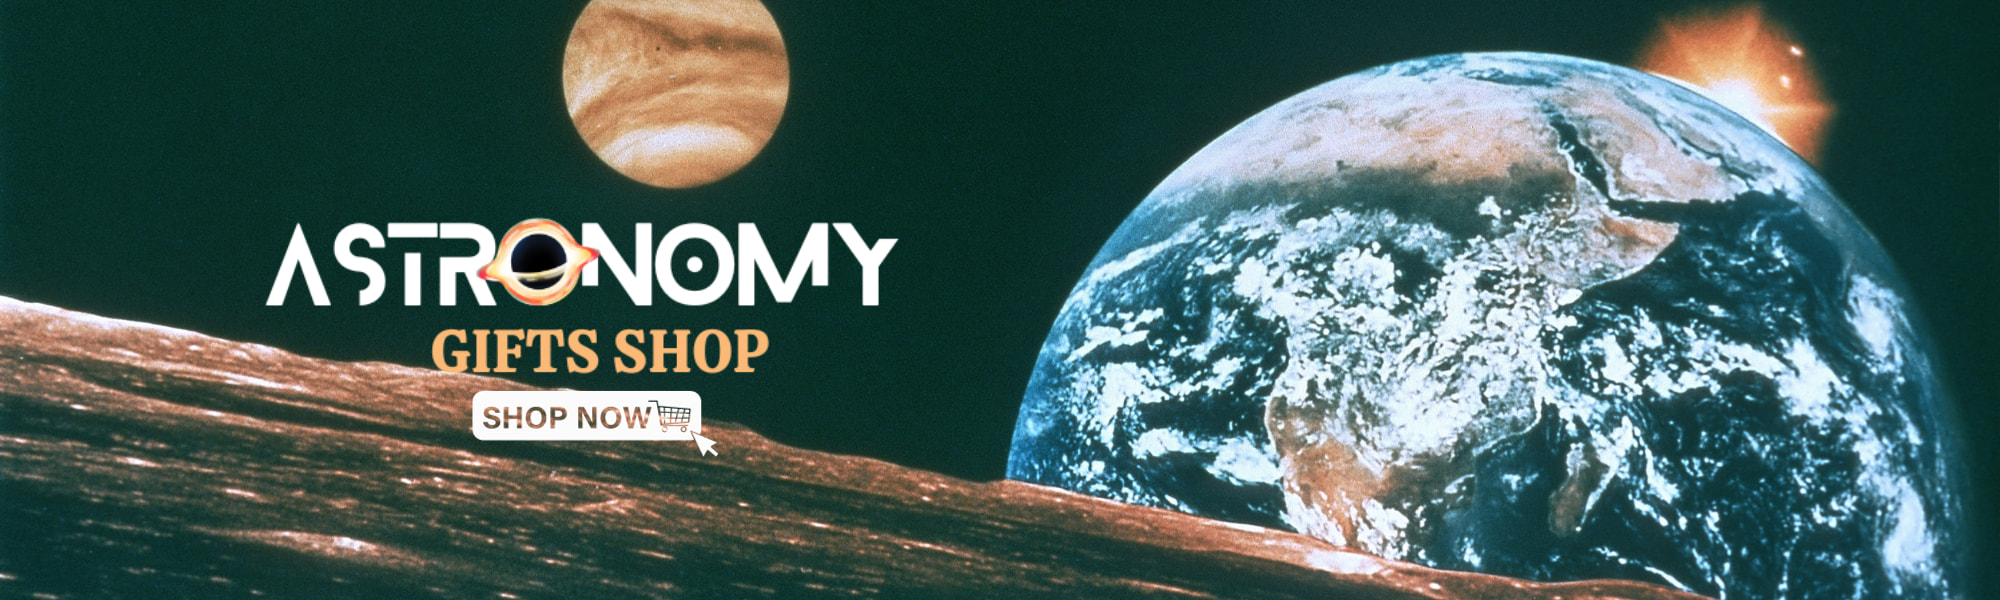 Astronomy Gifts Banner